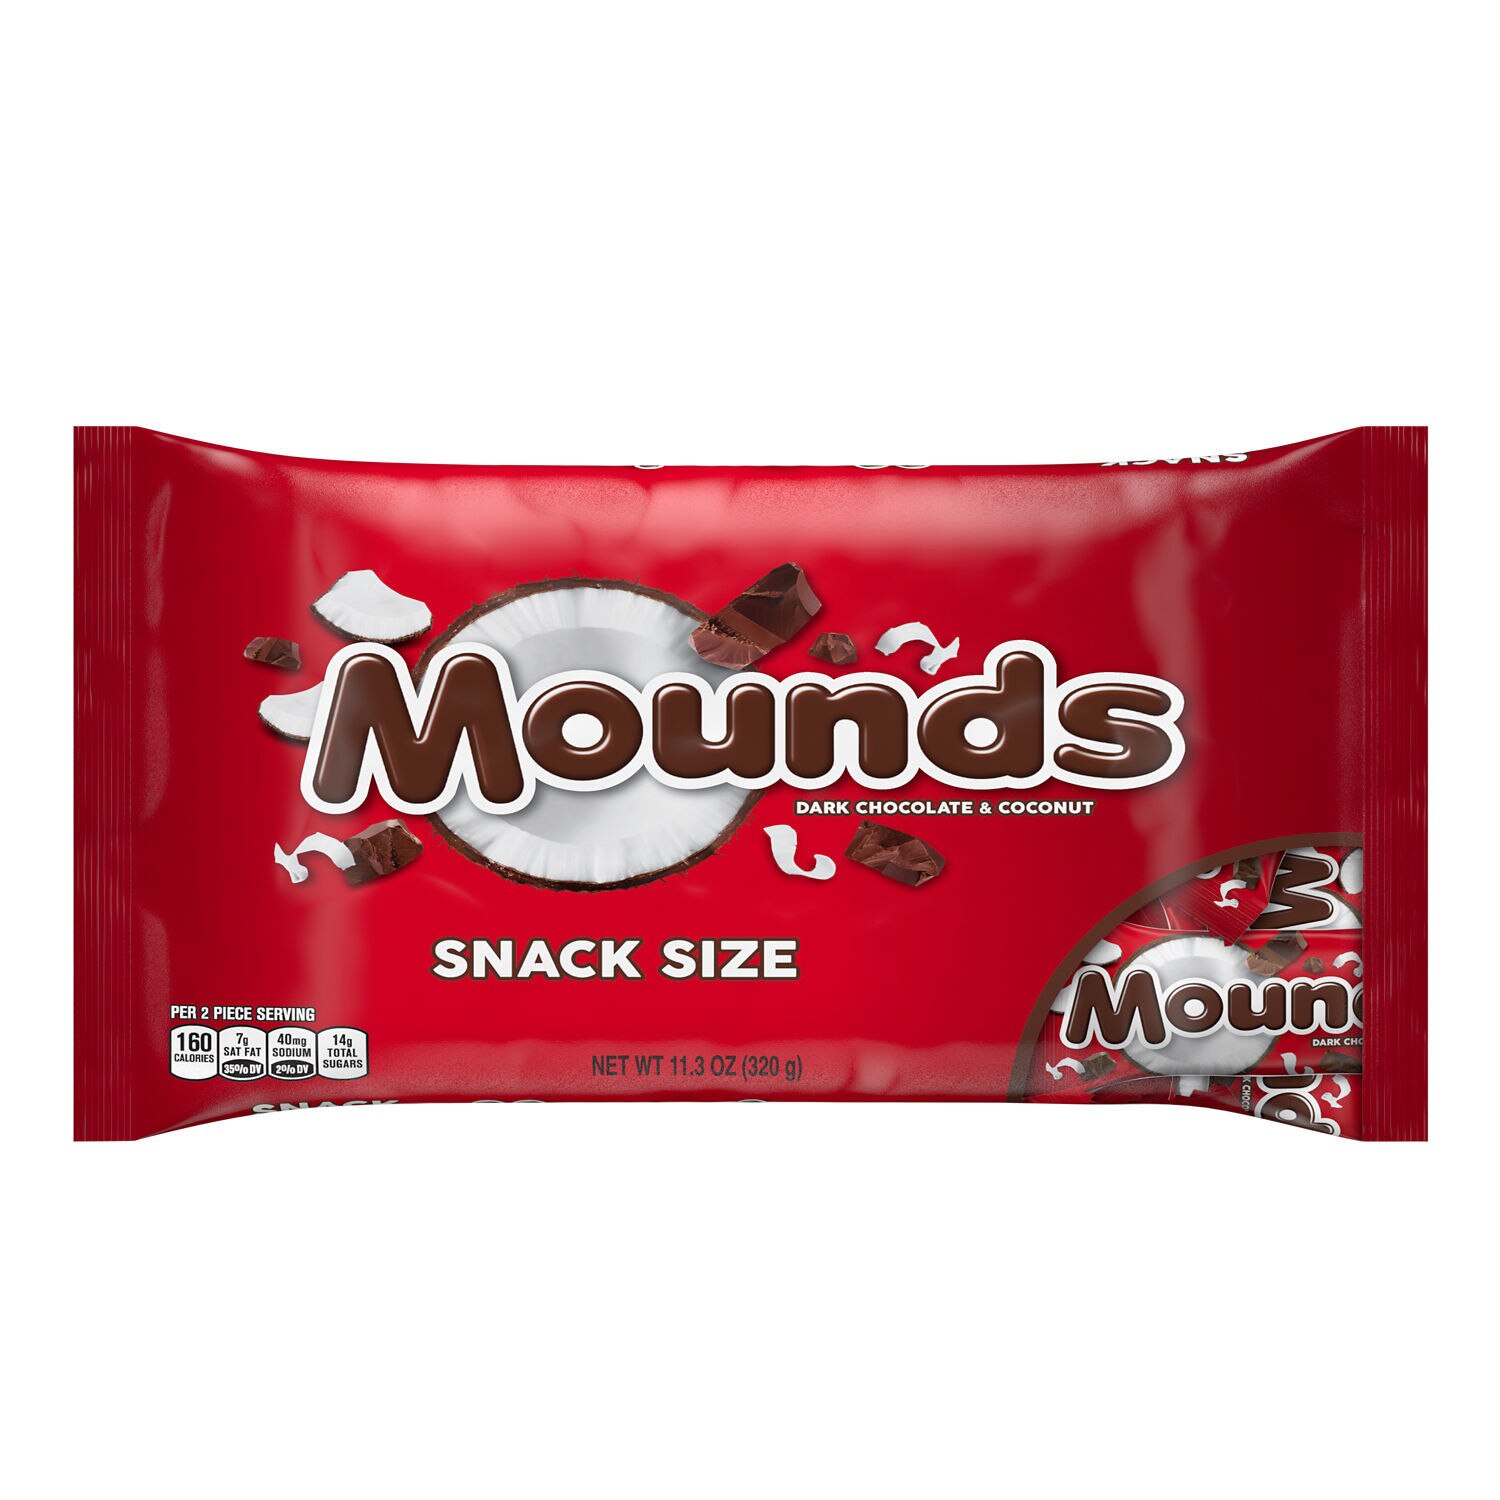 MOUNDS Dark Chocolate & Coconut Snack Size Candy Bars, 11.3 OZ